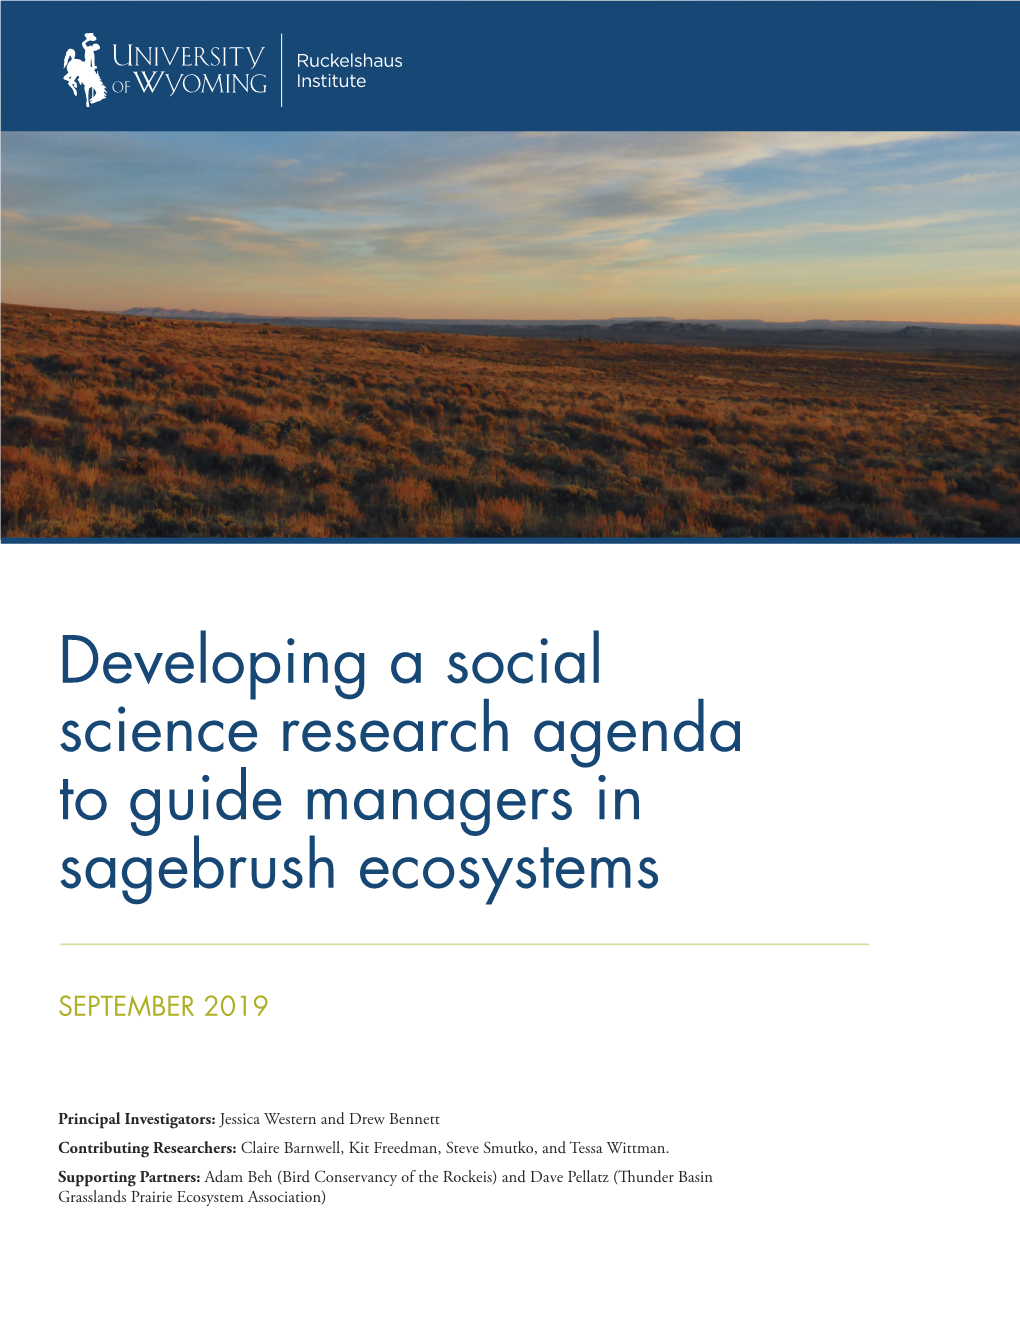 Developing a Social Science Research Agenda to Guide Managers in Sagebrush Ecosystems